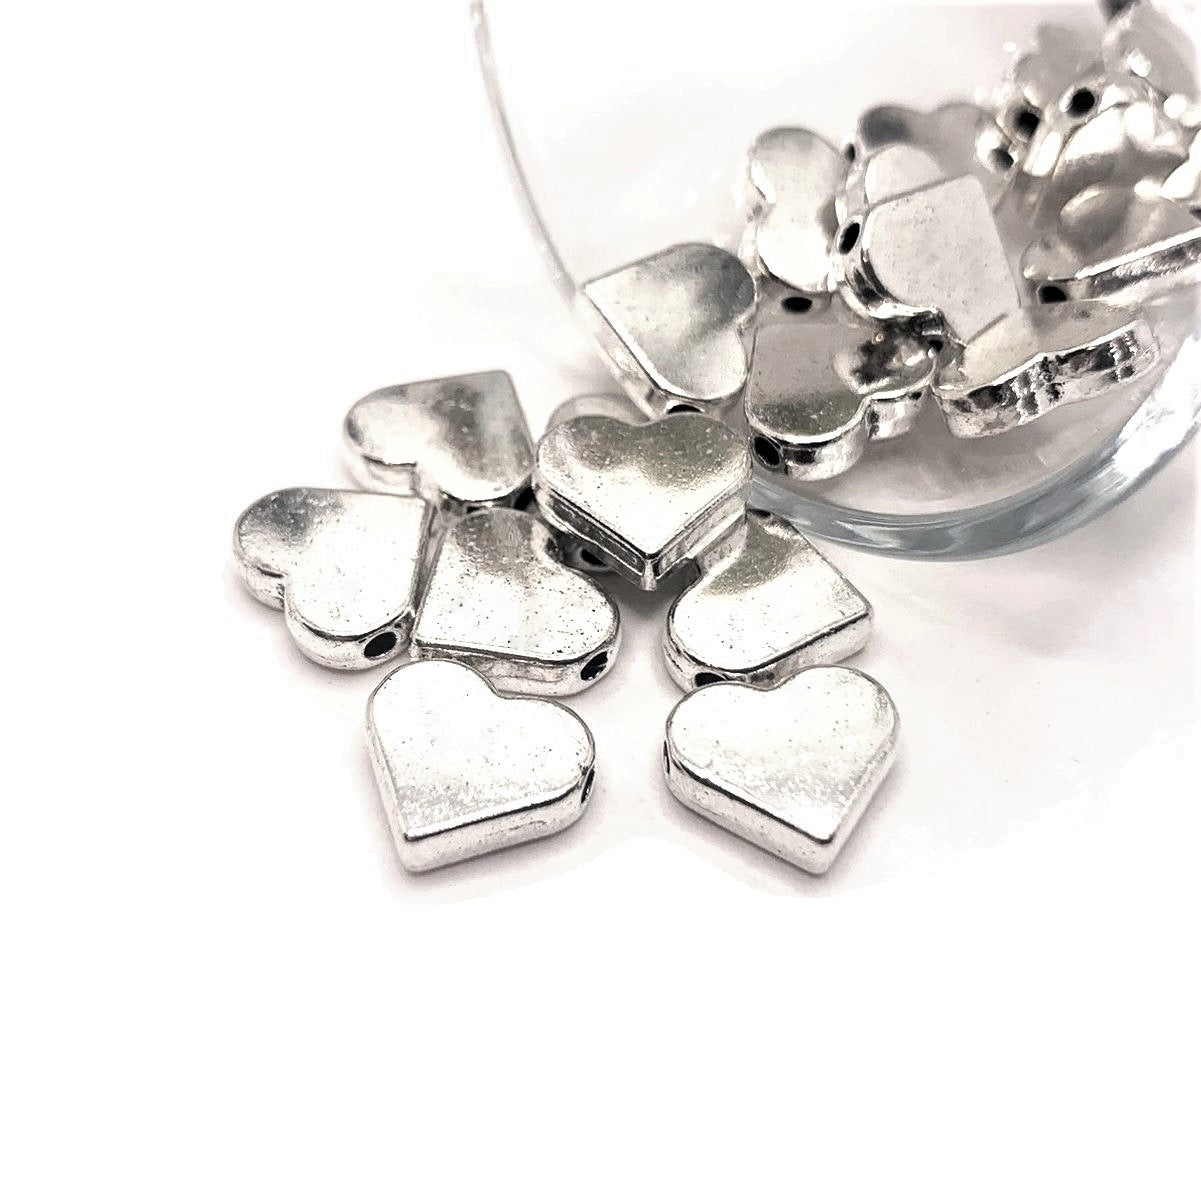 4, 20 or 50 Pieces: Antique Silver Heart Spacer Beads, 12x11mm - Double Sided